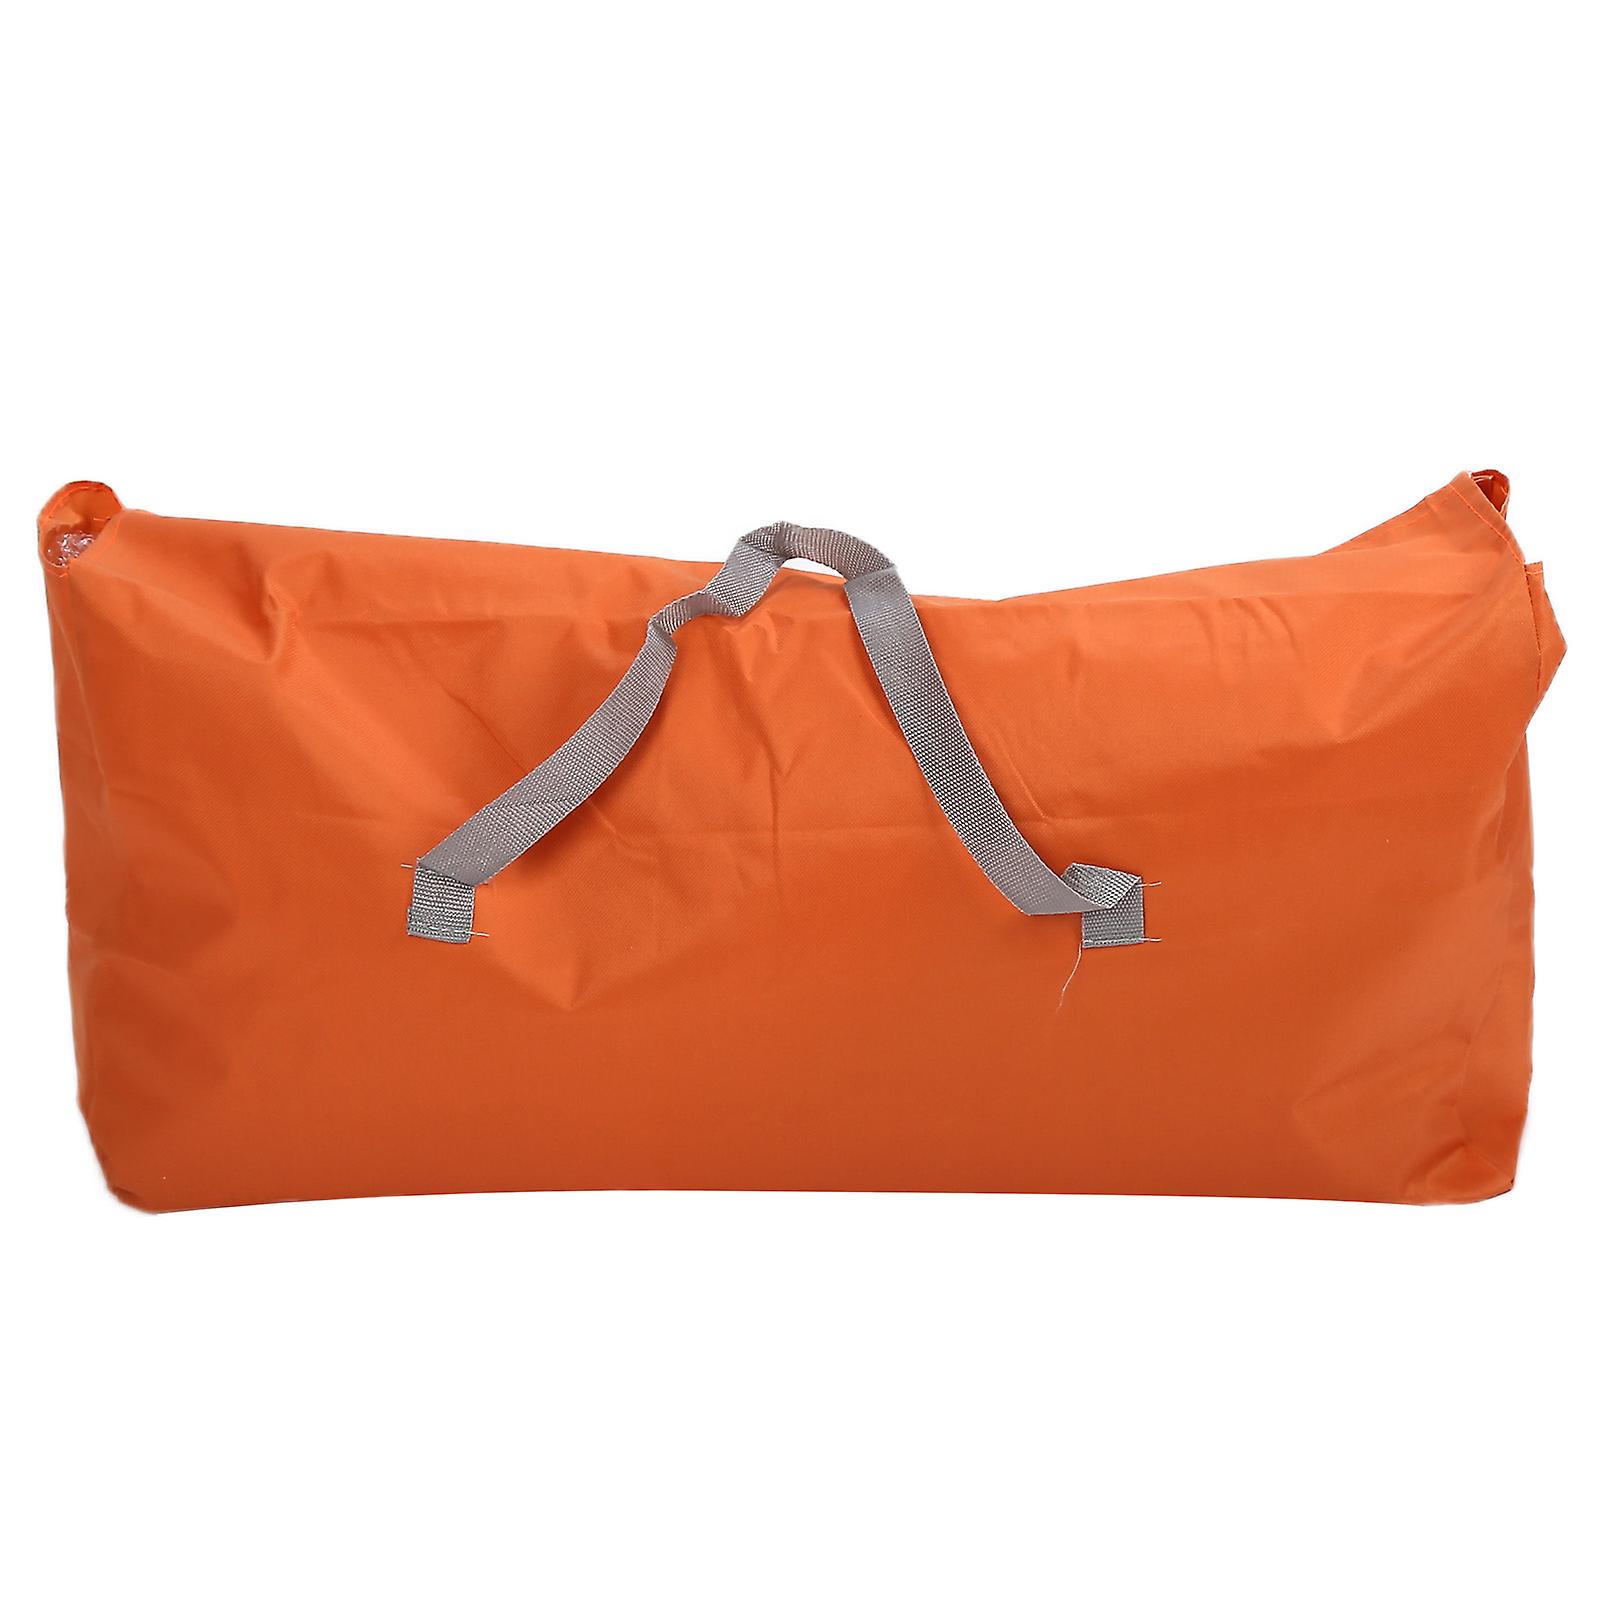 Bbq Tools Storage Bag，  Portable Grill Tool Carry Bag， Grill Storage Bag Oxford Cloth Portable Carrying Bag For Outdoor Picnic Family Gatherings